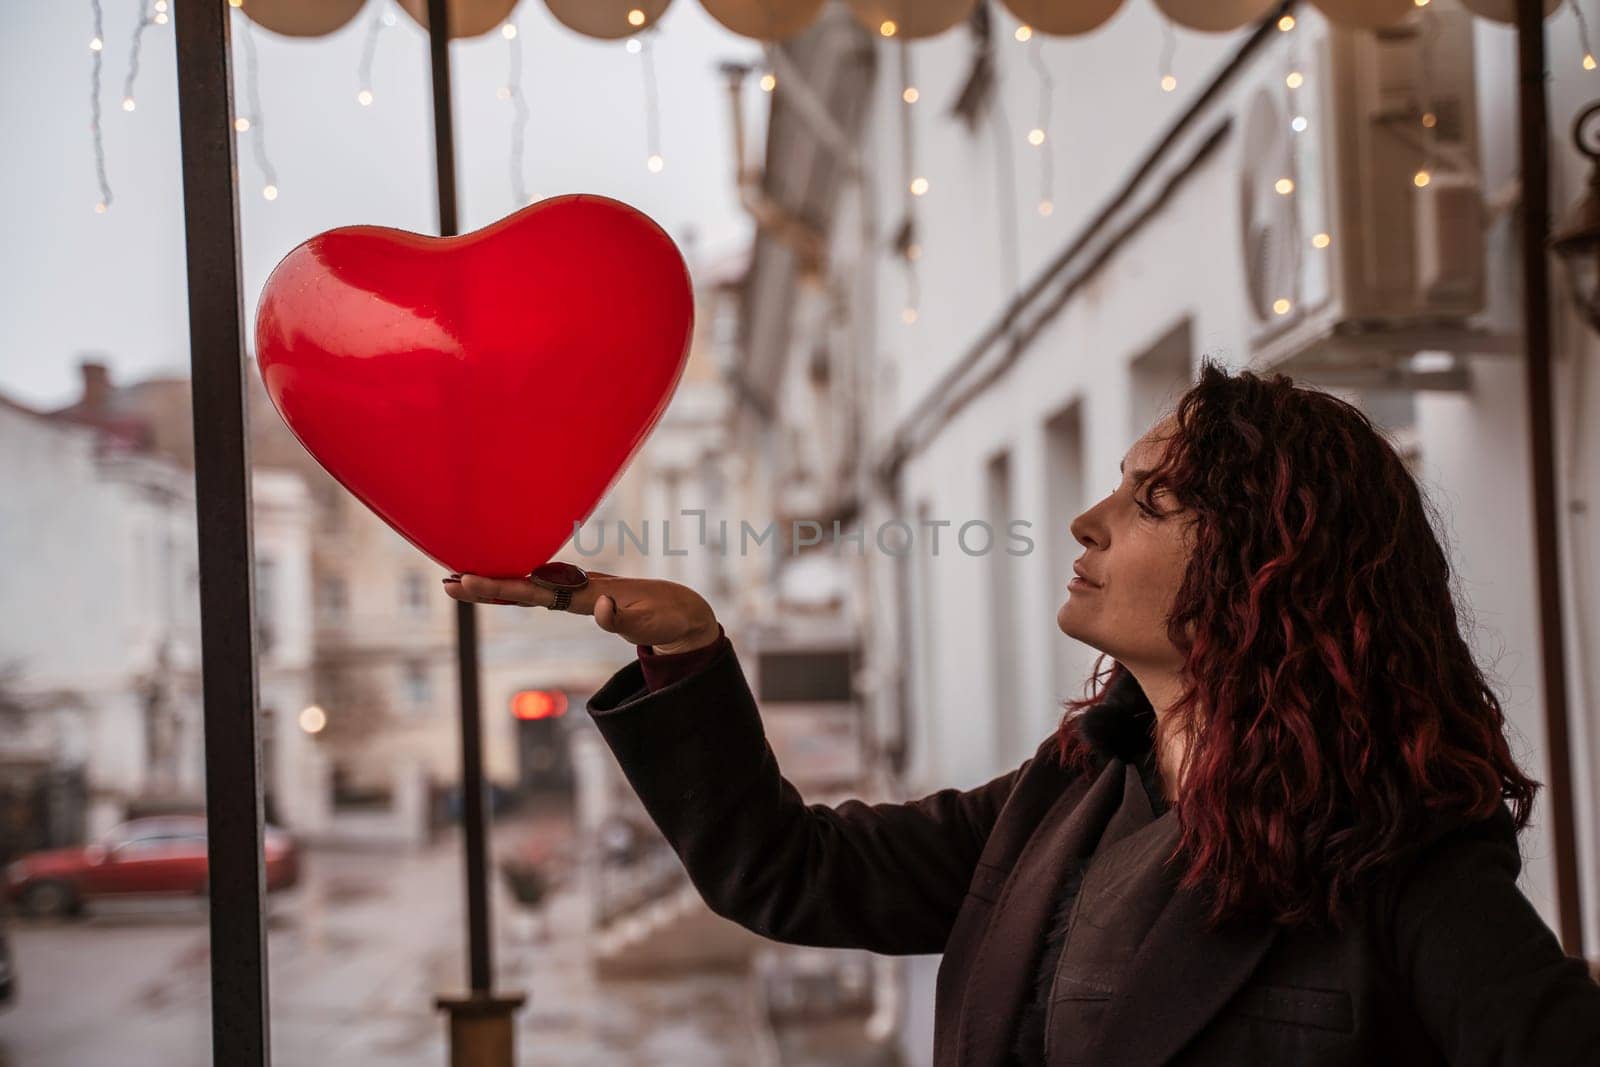 A woman holding a red heart balloon. The woman is wearing a black coat and has red hair. The scene is set in a city street with cars and a building in the background